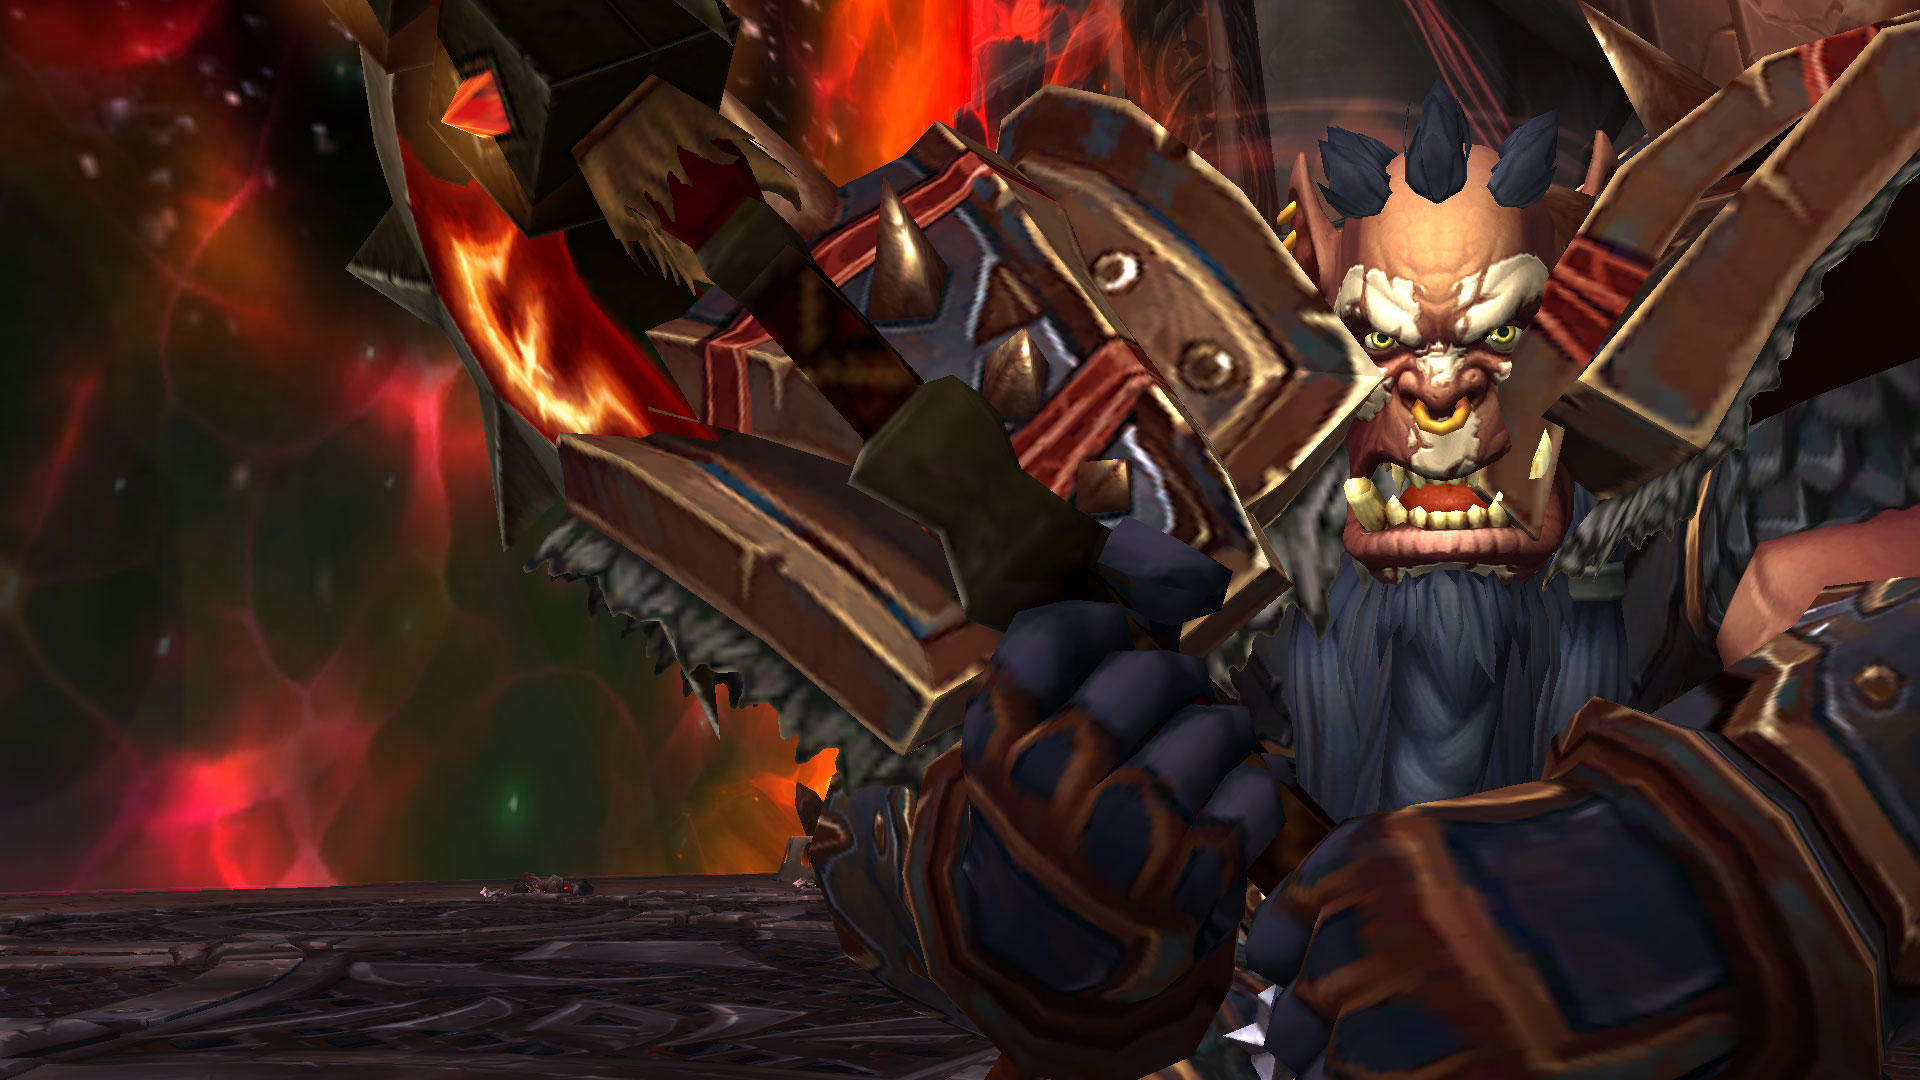 WoW Orc Lore – Amazing Warcraft History In 1200 Words